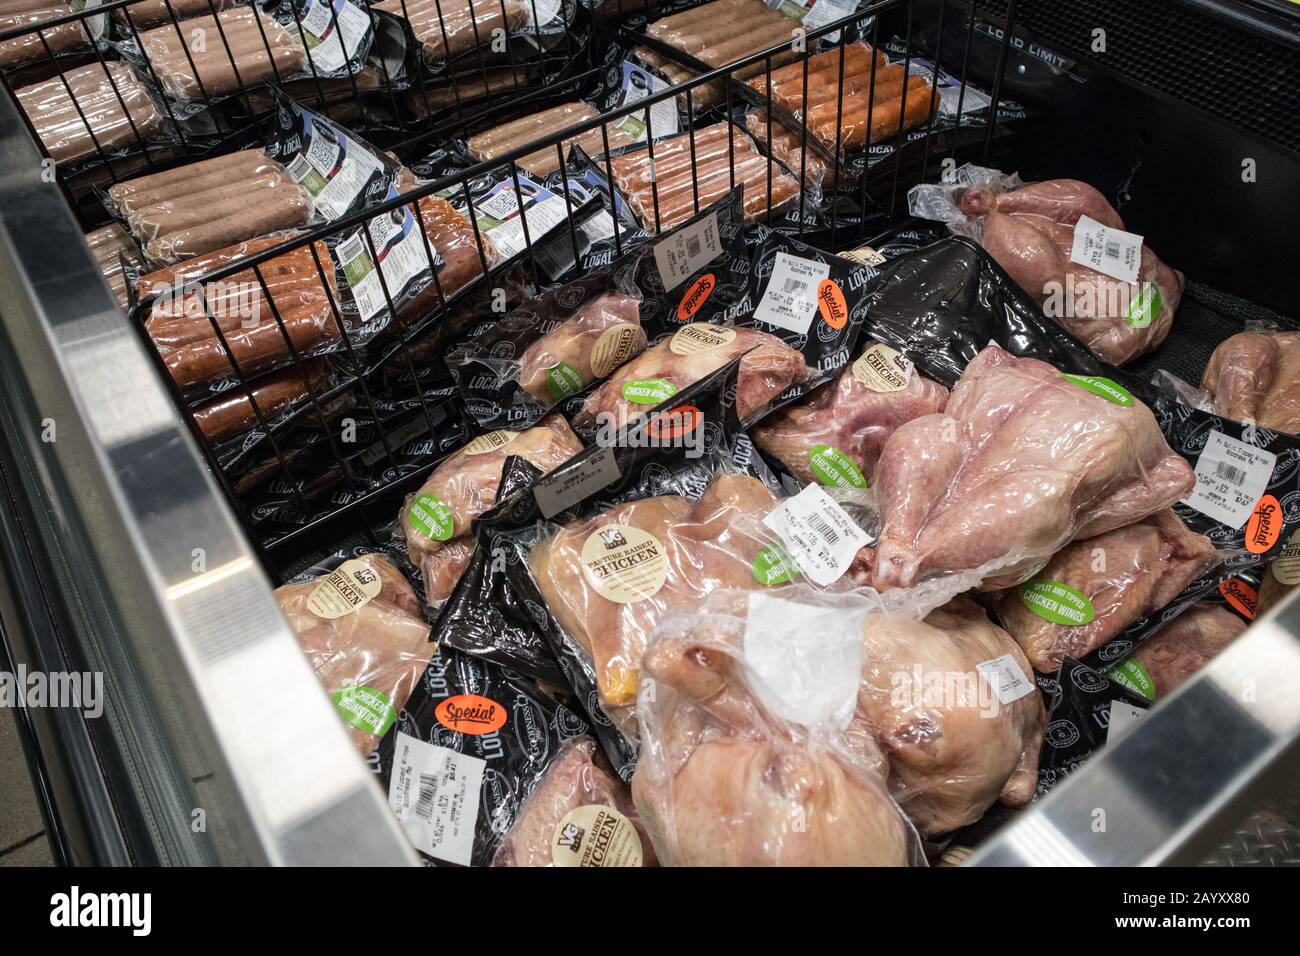 The meat counter of a supermarket with natural and organic products. Stock Photo